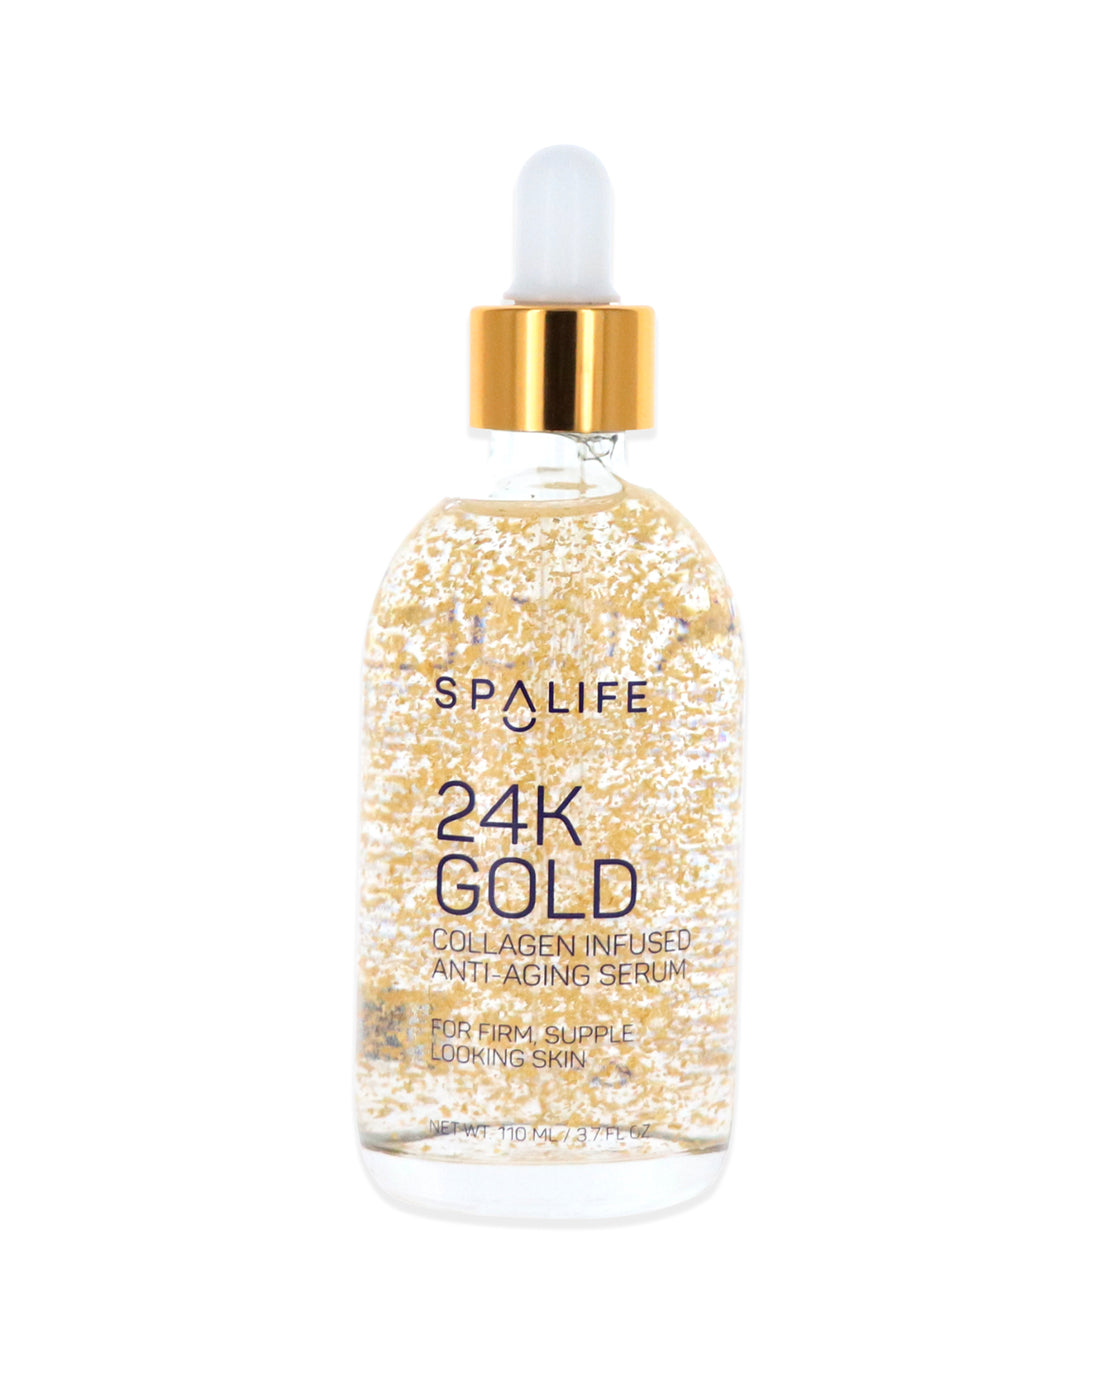 SpaLife 24K Gold Collagen Infused Anti-aging Serum